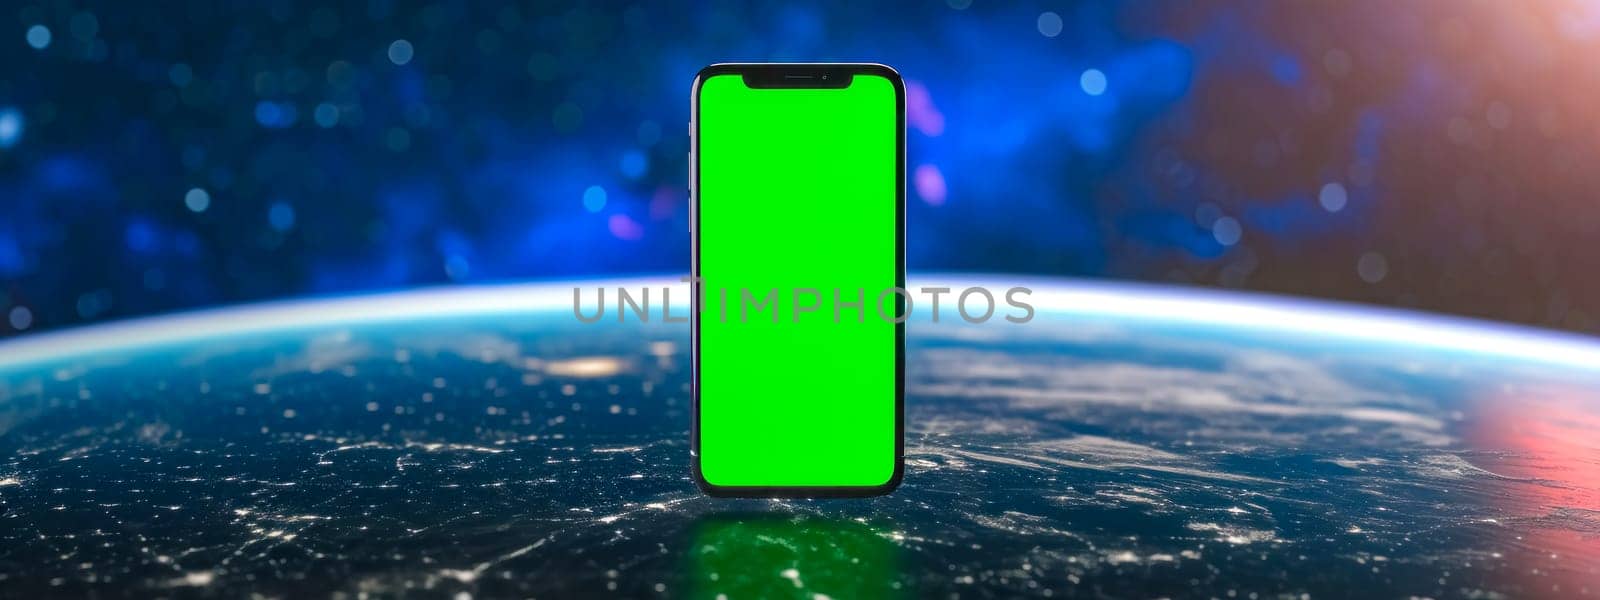 smartphone with a green screen in the foreground, set against a backdrop of a highly detailed, illuminated Earth from space, with bokeh light effects enhancing the cosmic atmosphere, banner